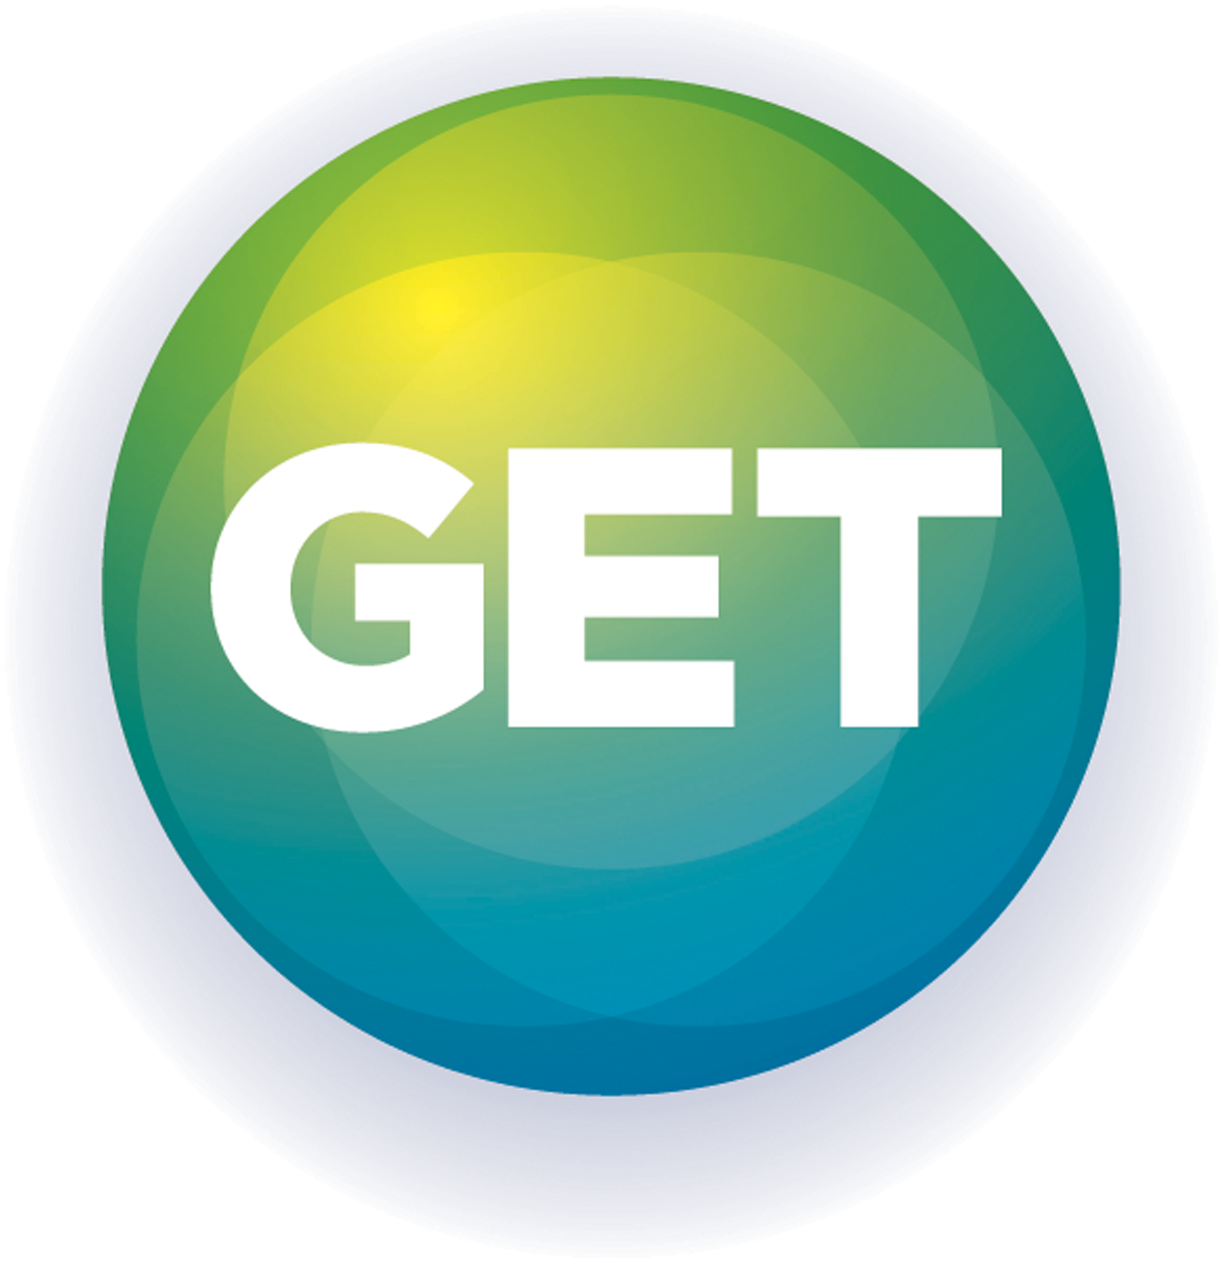 G E T Text Logo Surrounded By A Blue And Green Circle - Logo Get (1500x1500)